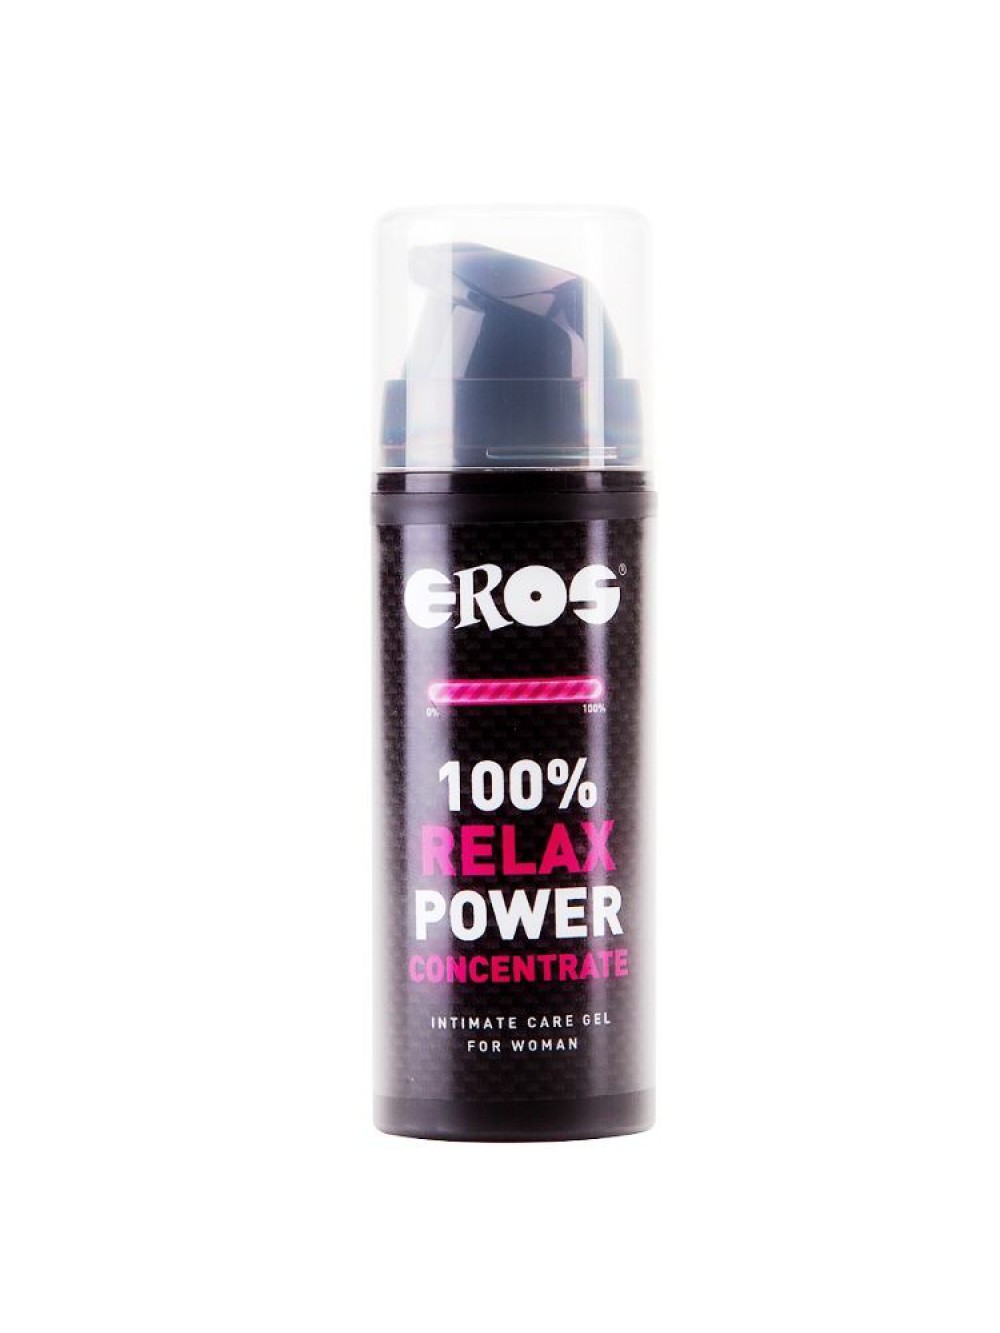 EROS 100% RELAX ANAL POWER CONCENTRATE 4035223186633